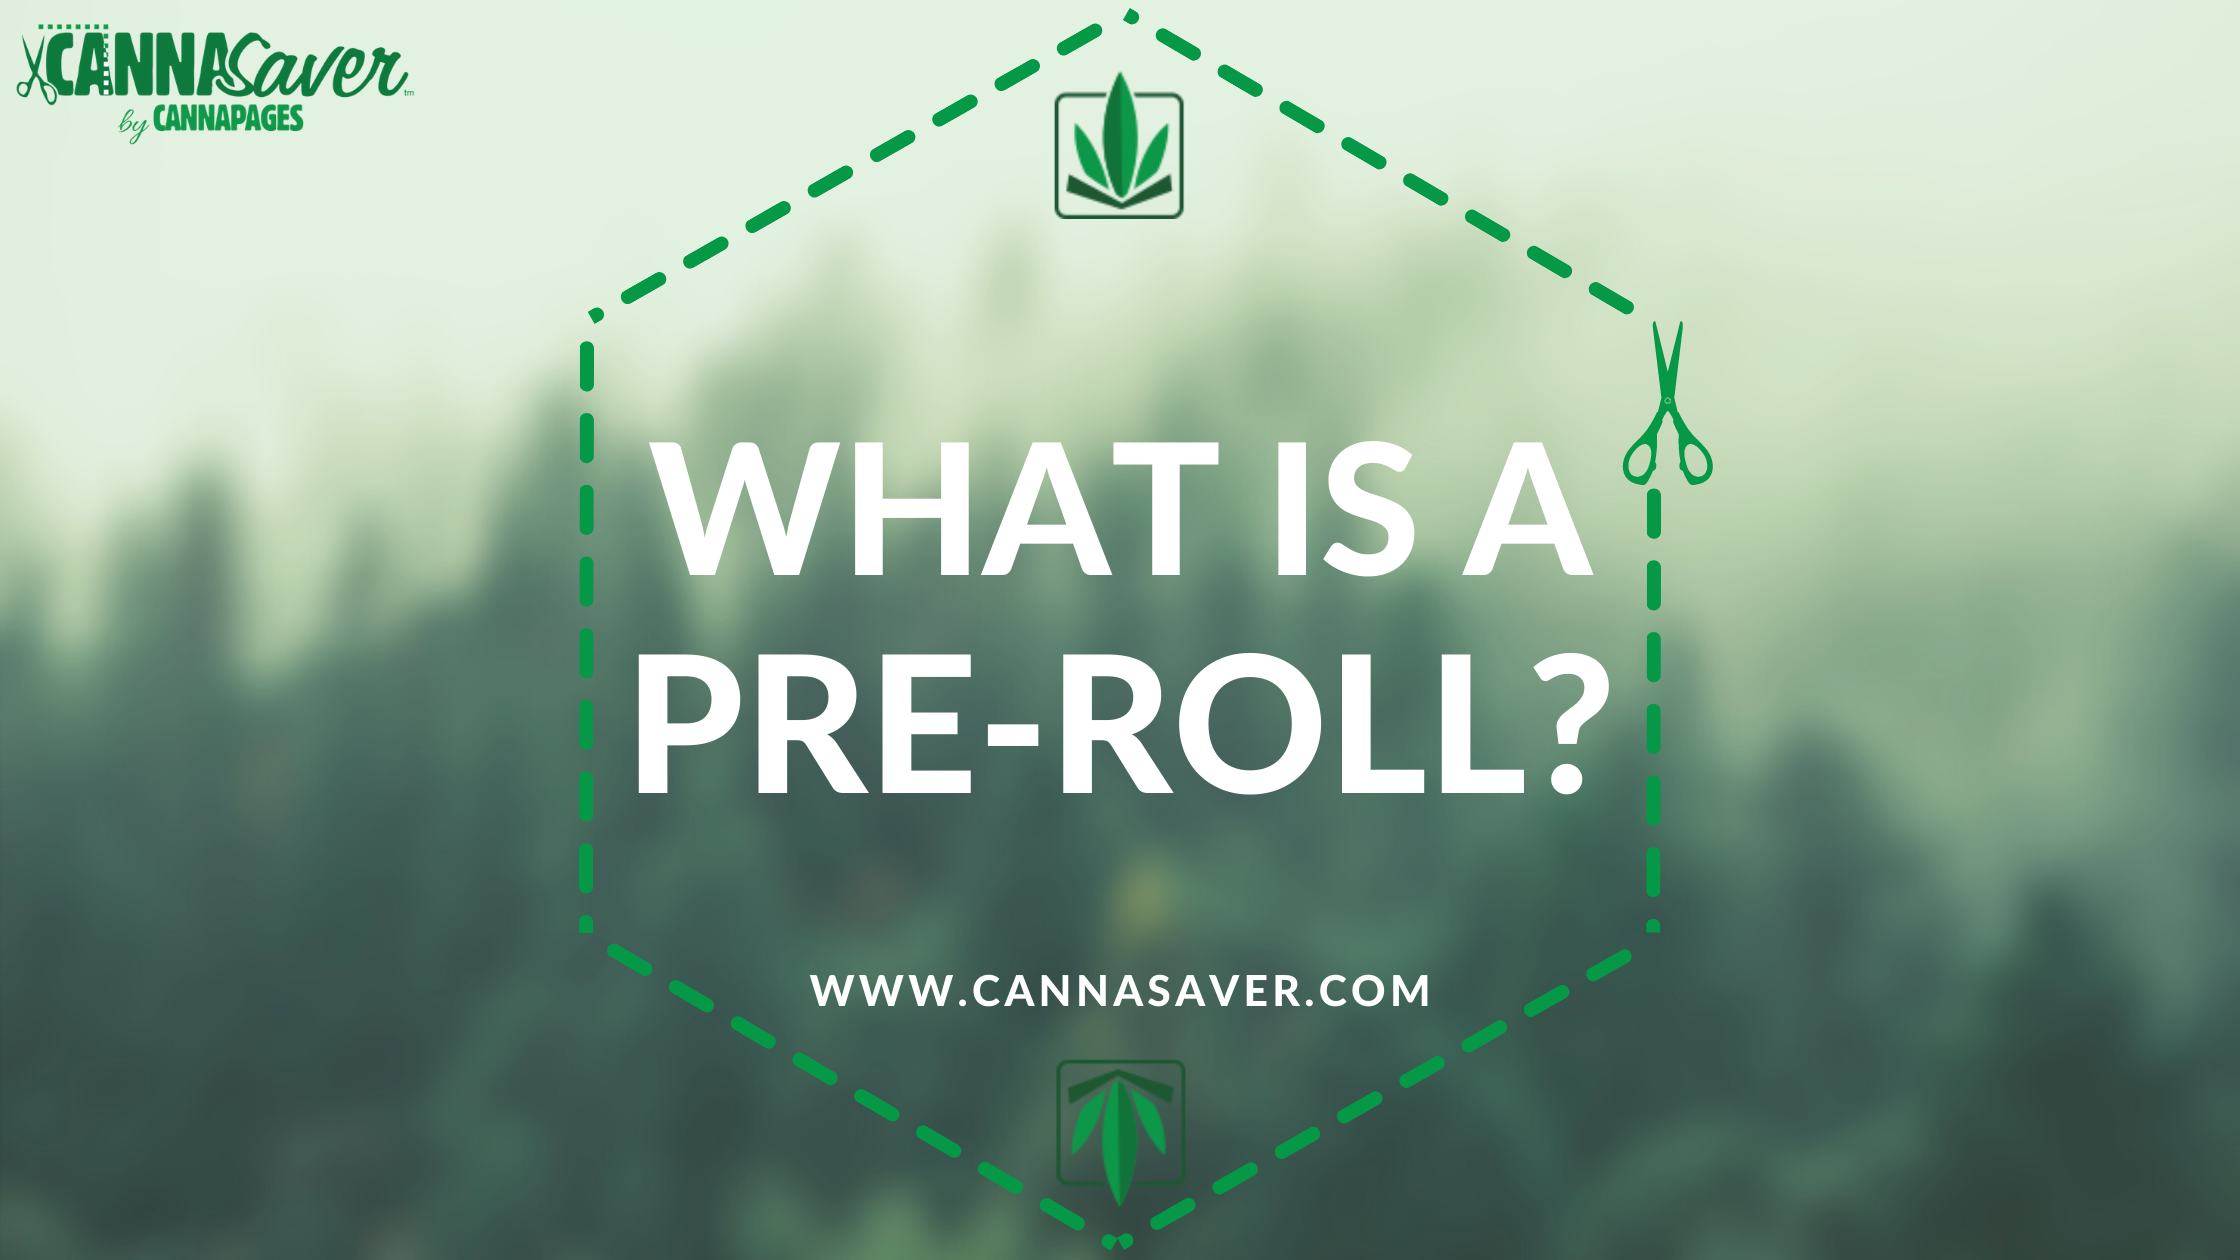 What Is a Preroll?